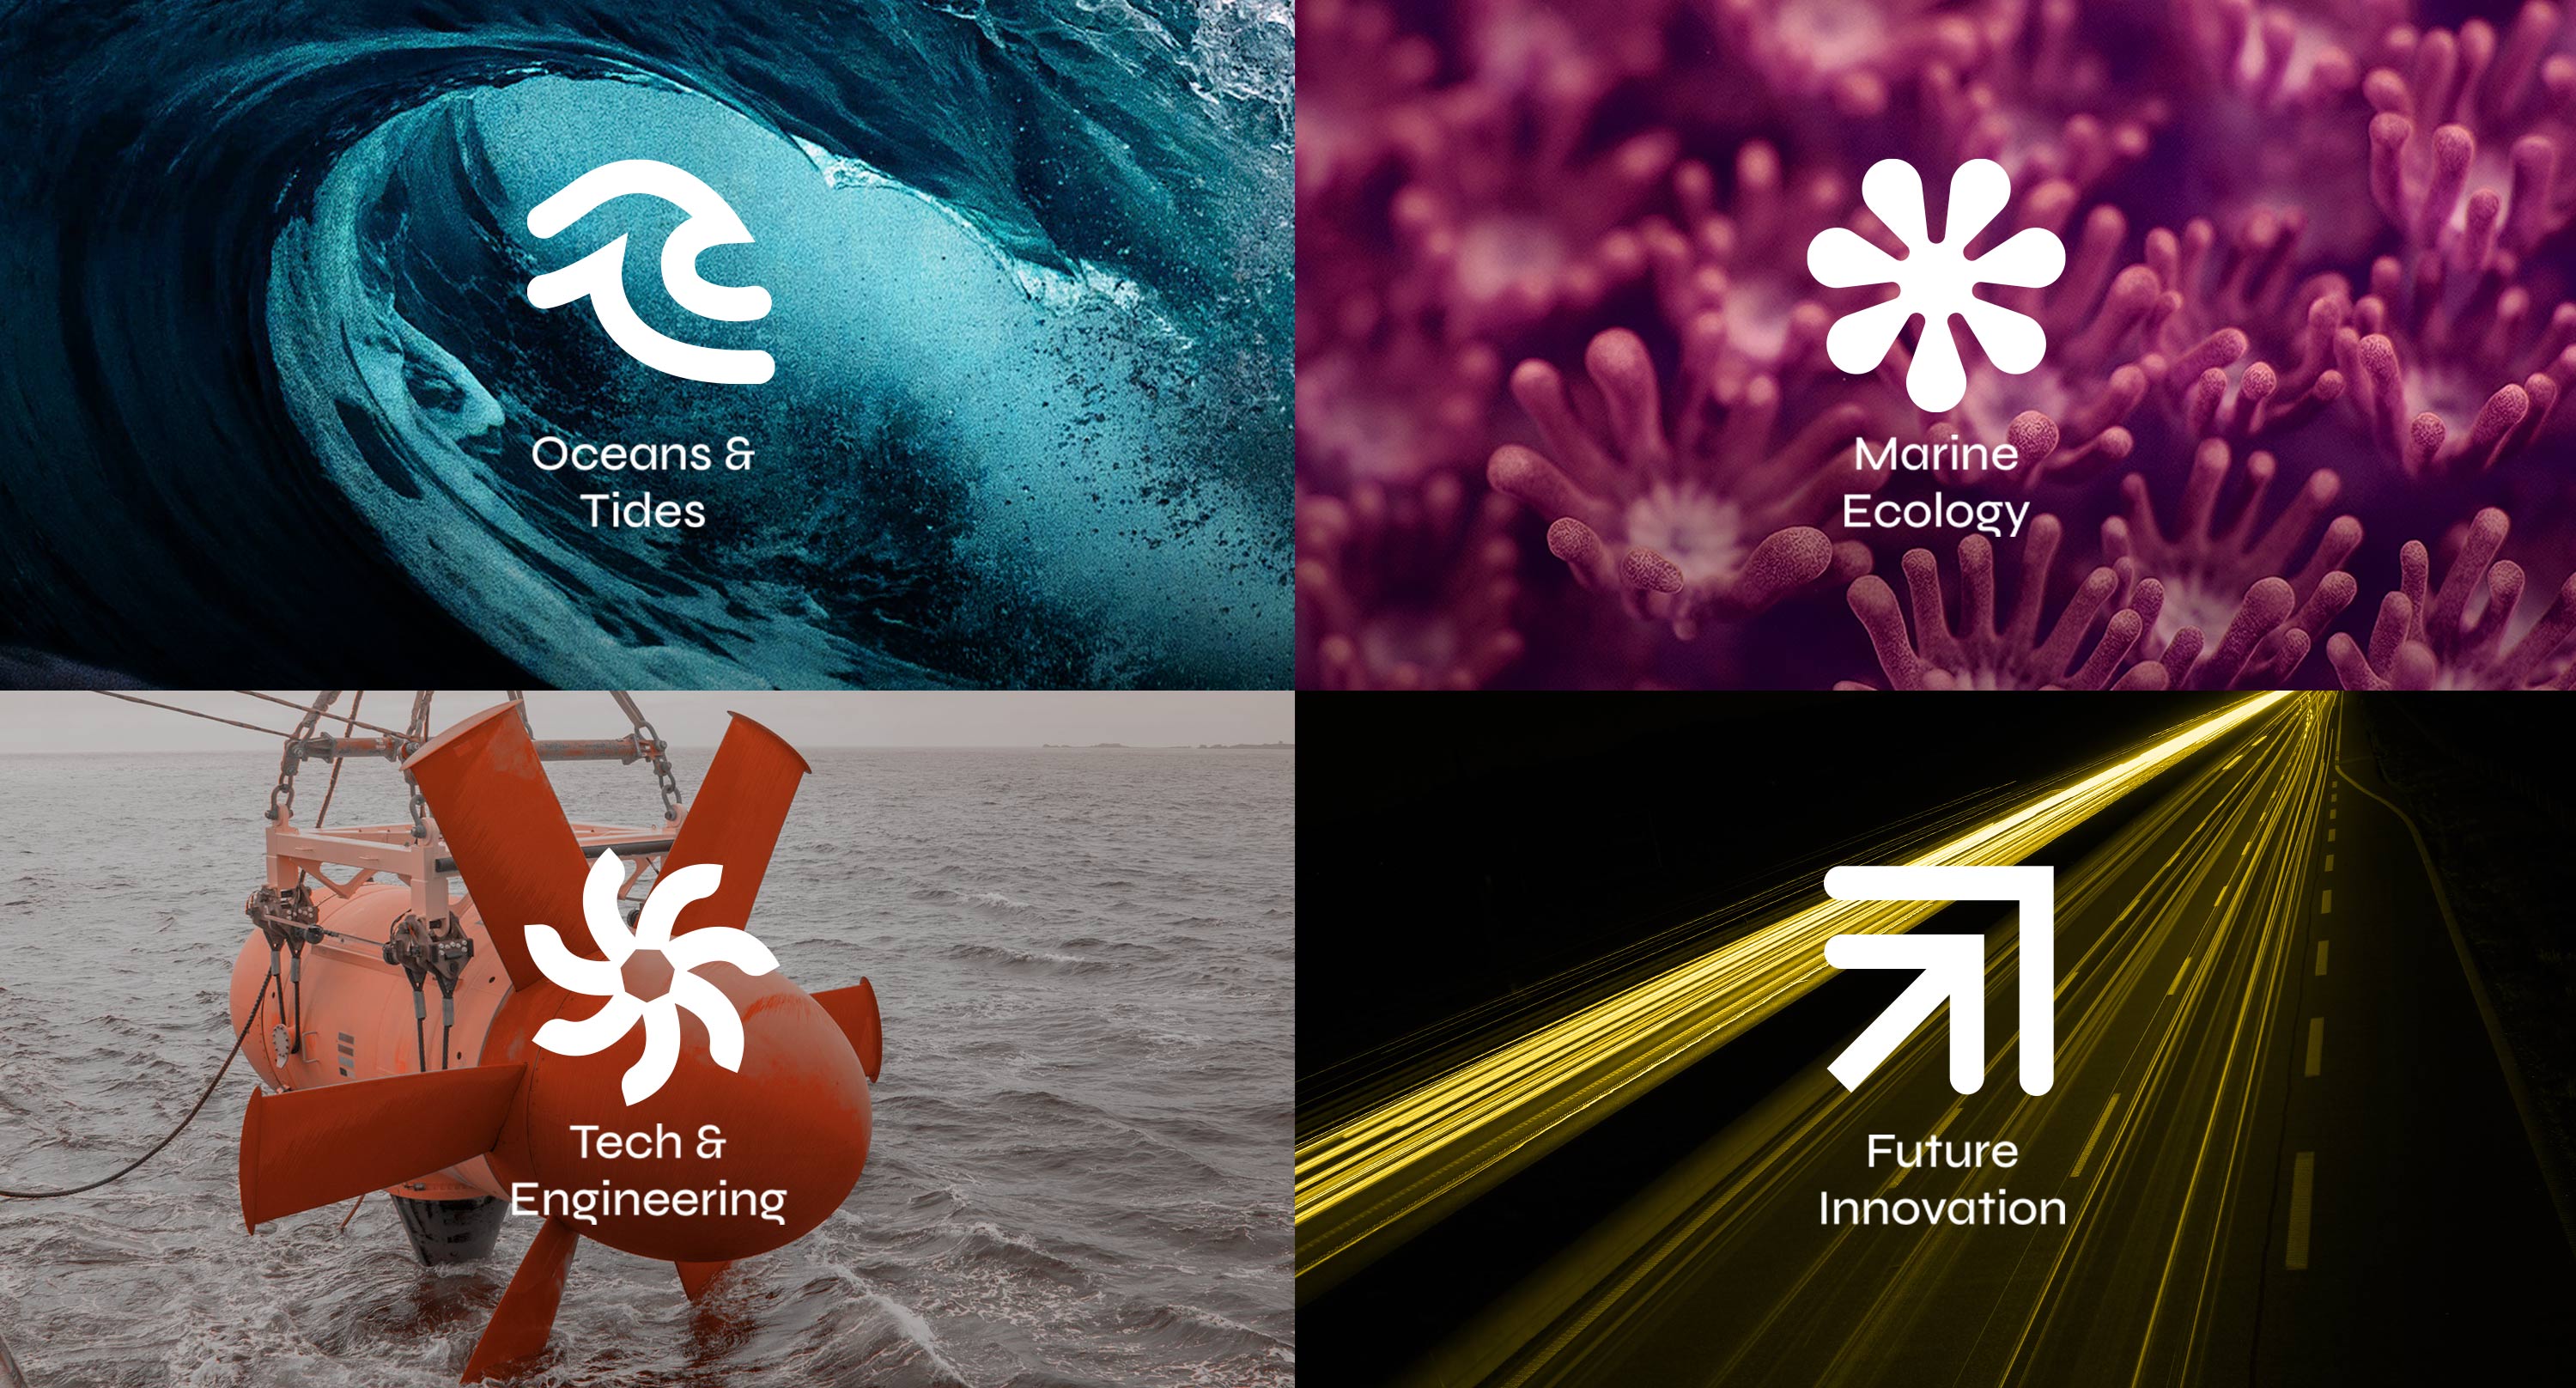 four core aspects of Soak Up- oceans, marine biology, technology & enginering and future innovation